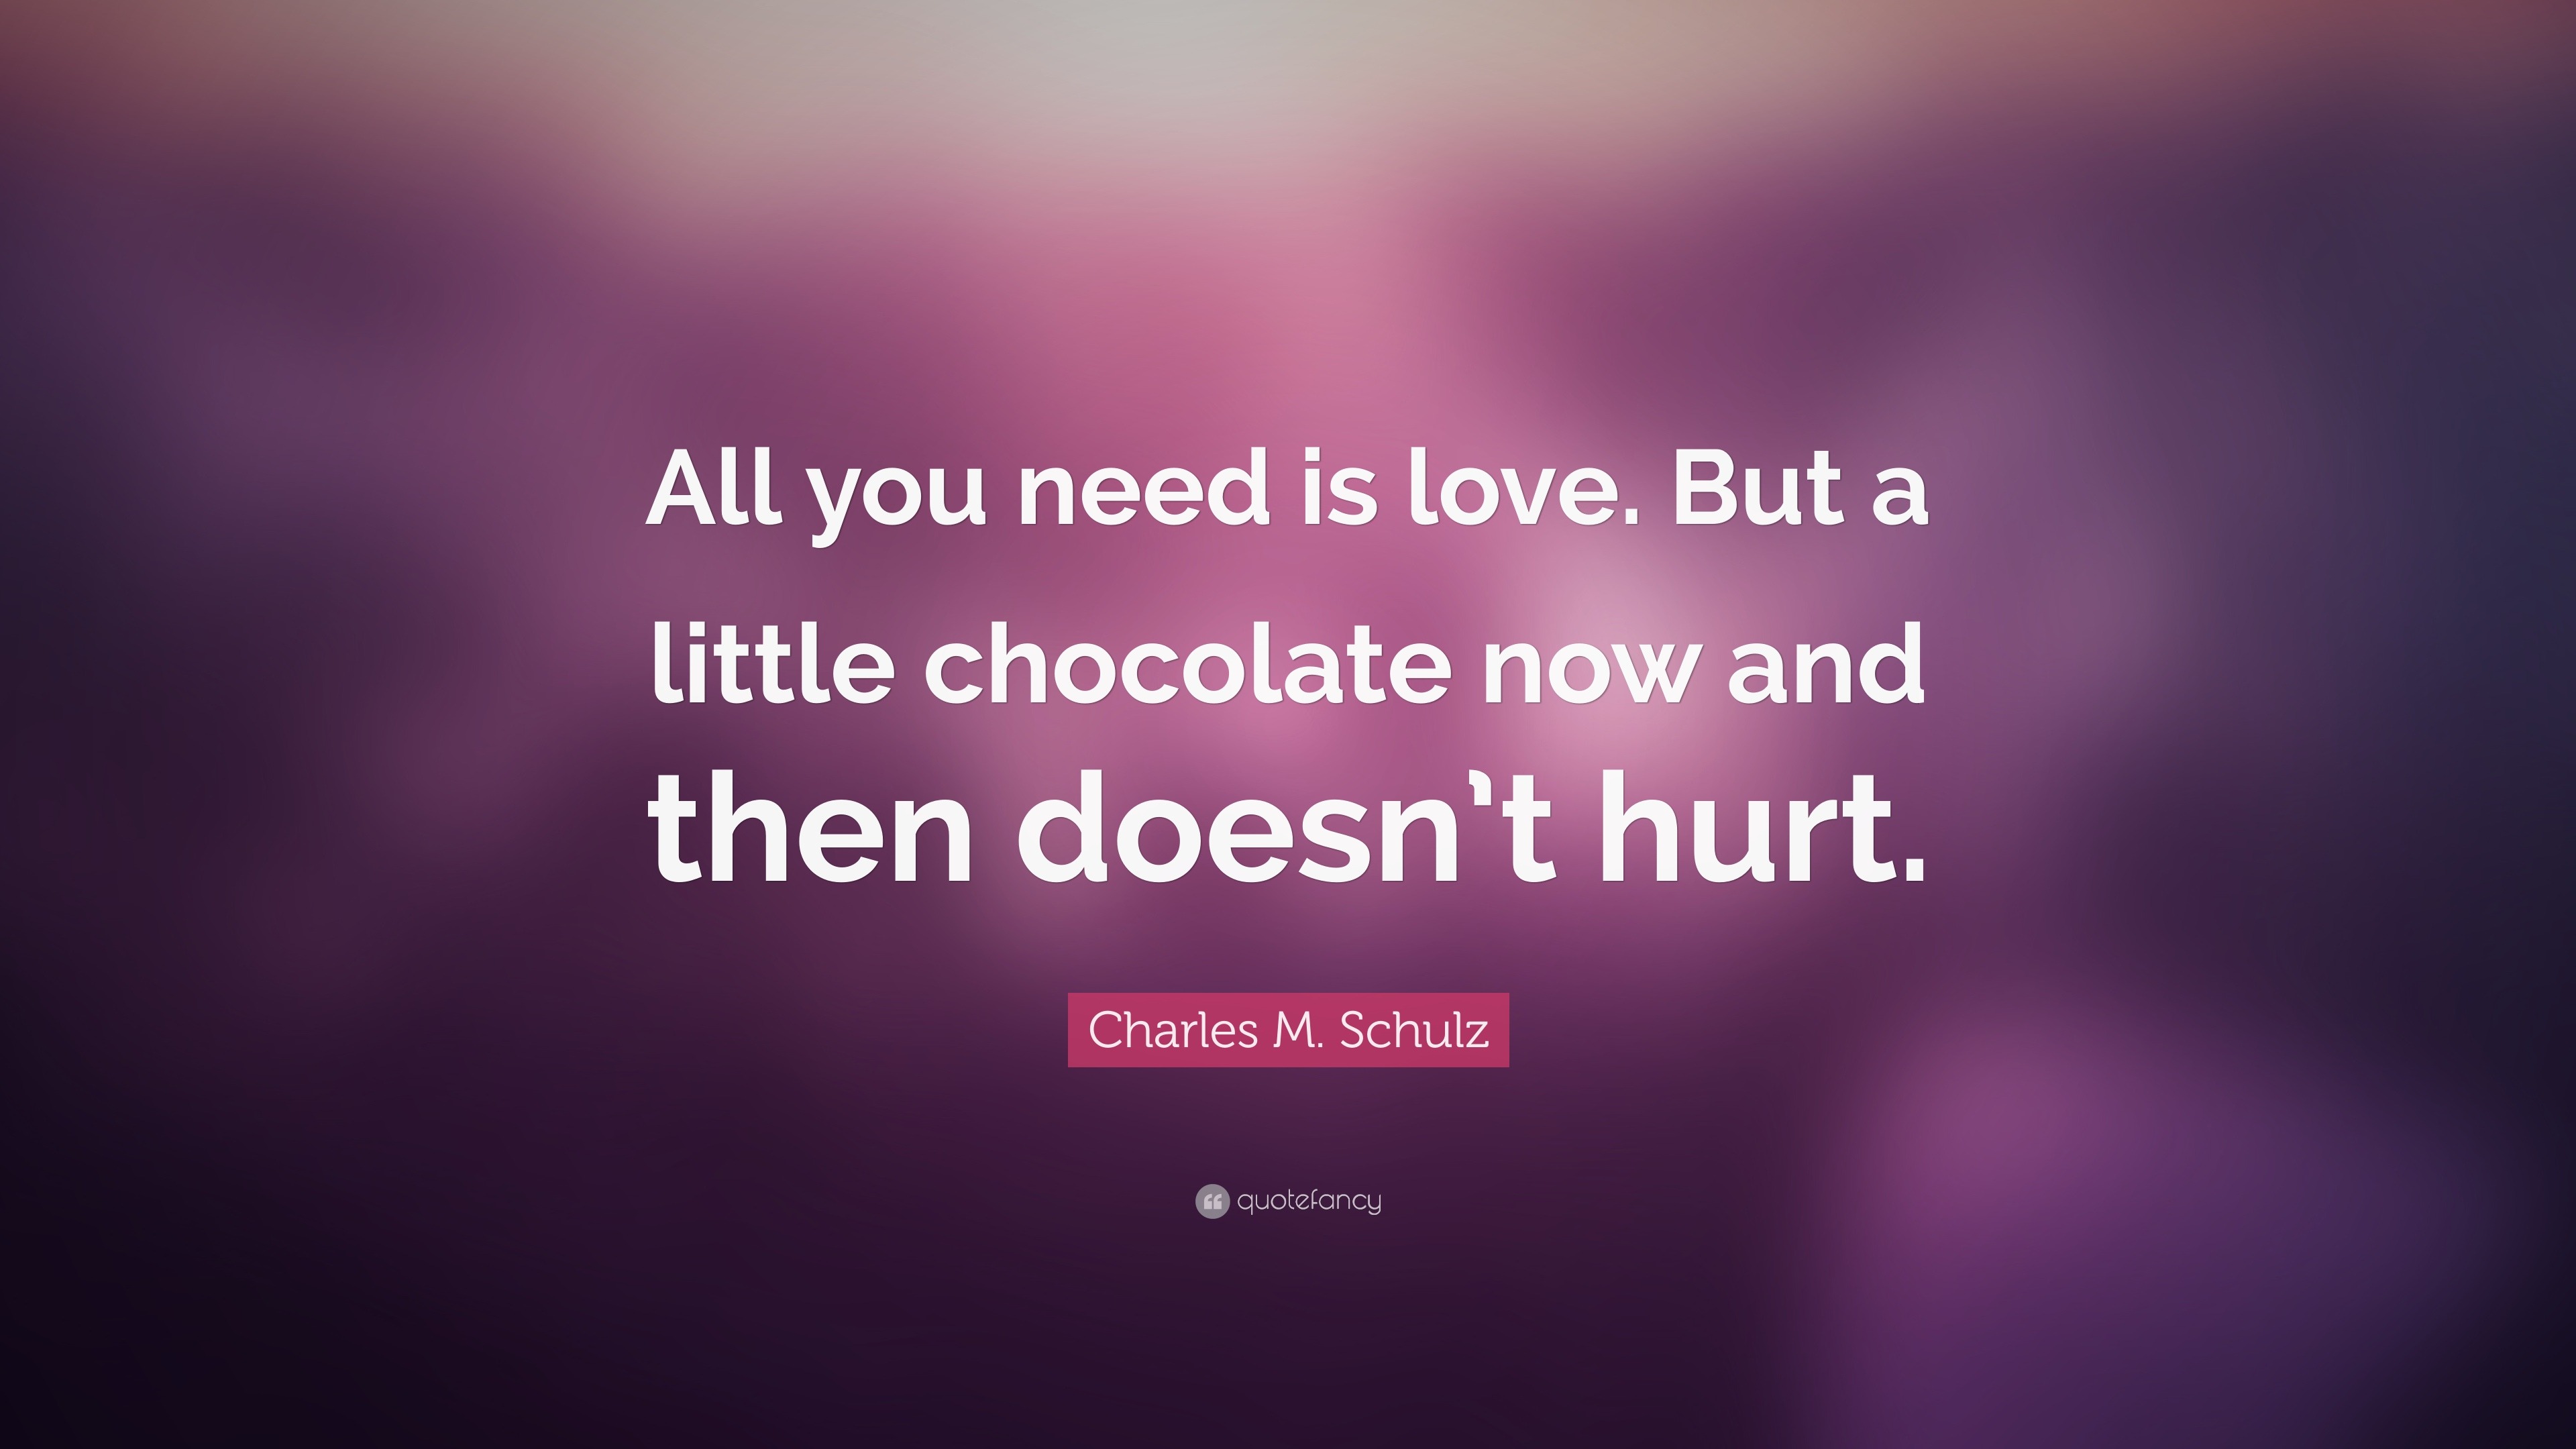 Charles M Schulz Quote All you need is love But a little